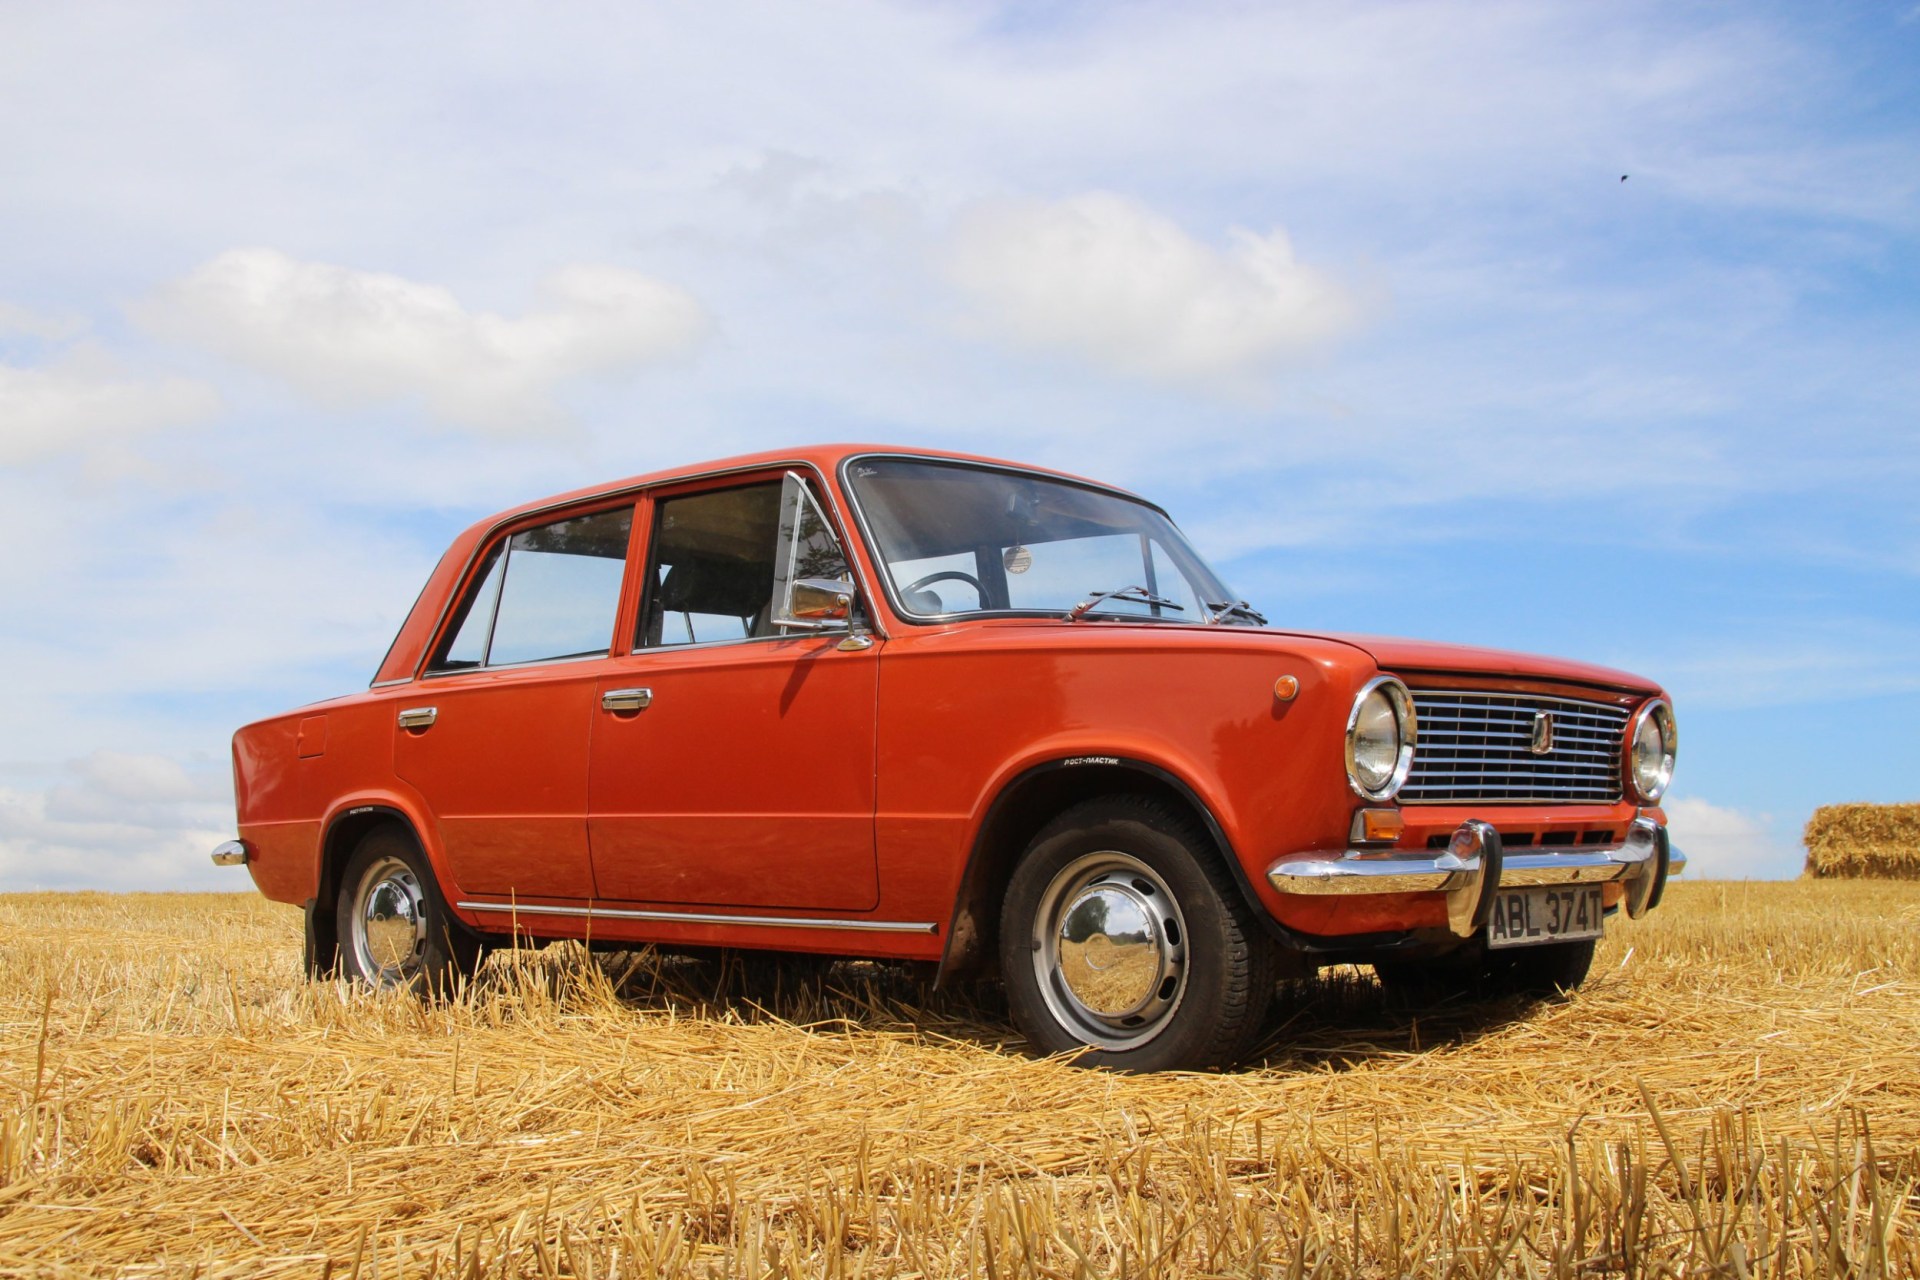 50 years of lada: the cold war-era car that has a special place in british hearts